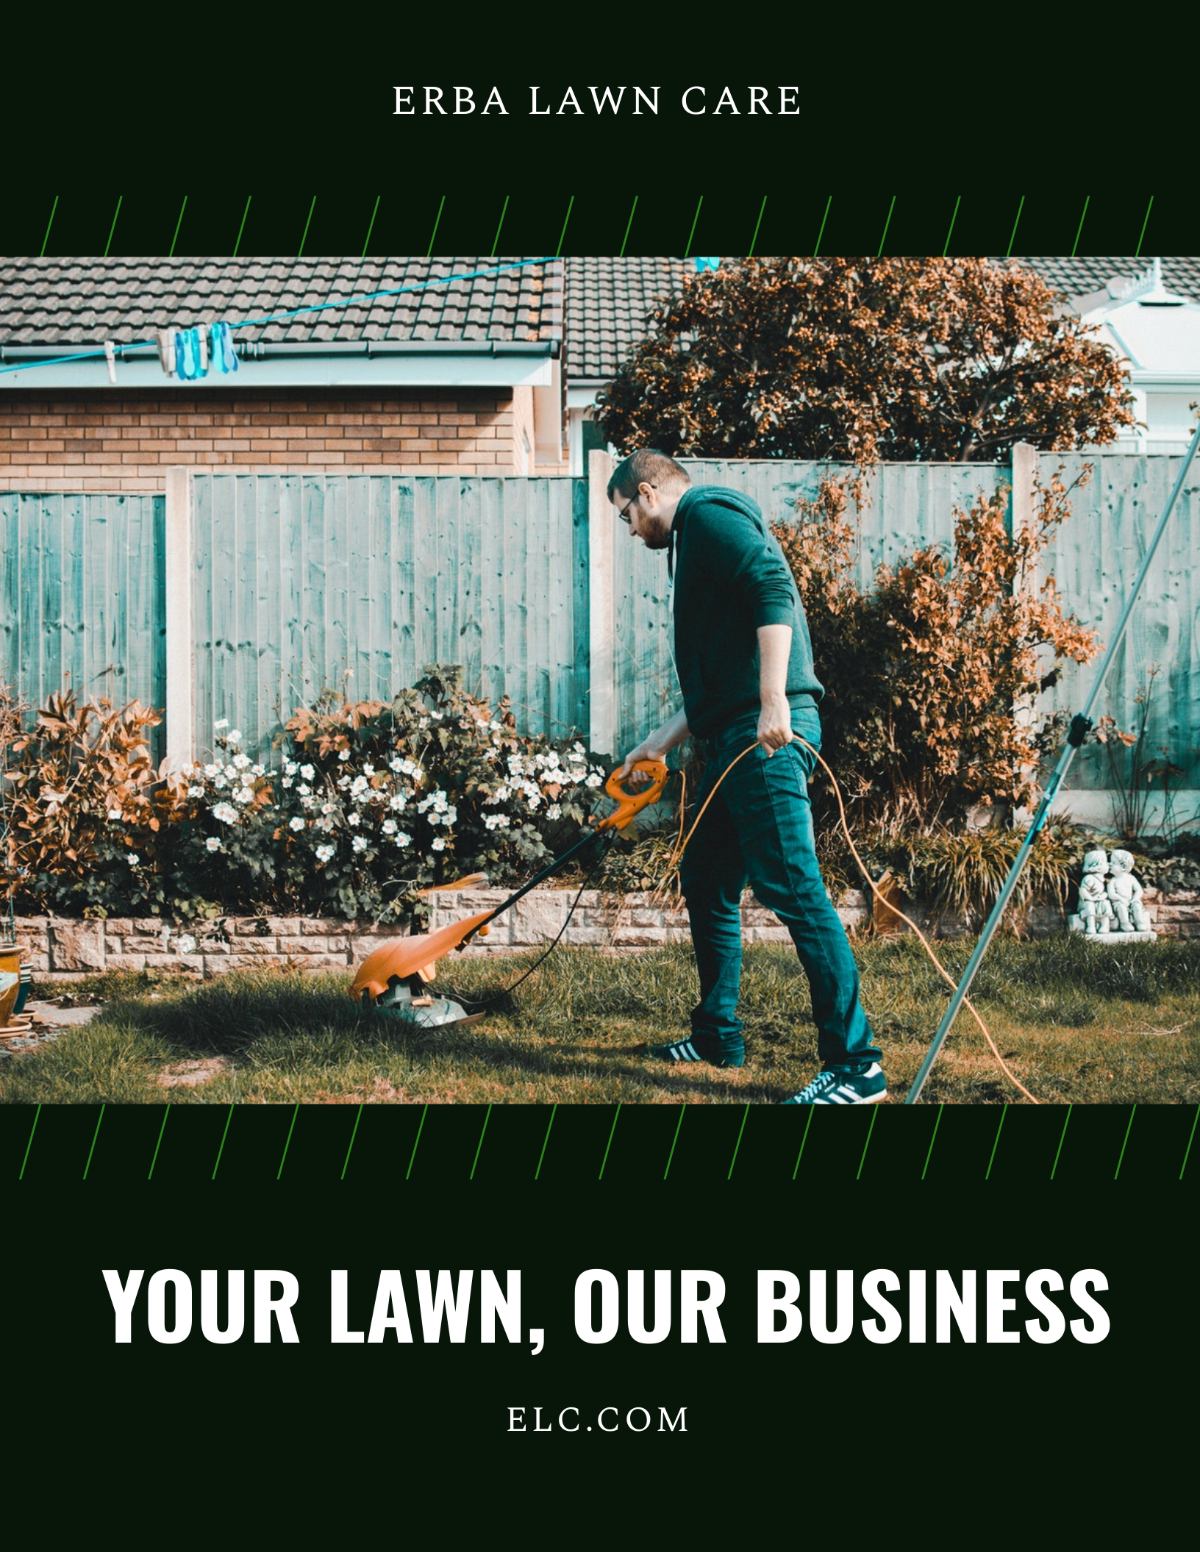 Lawn Care Business Flyer Template